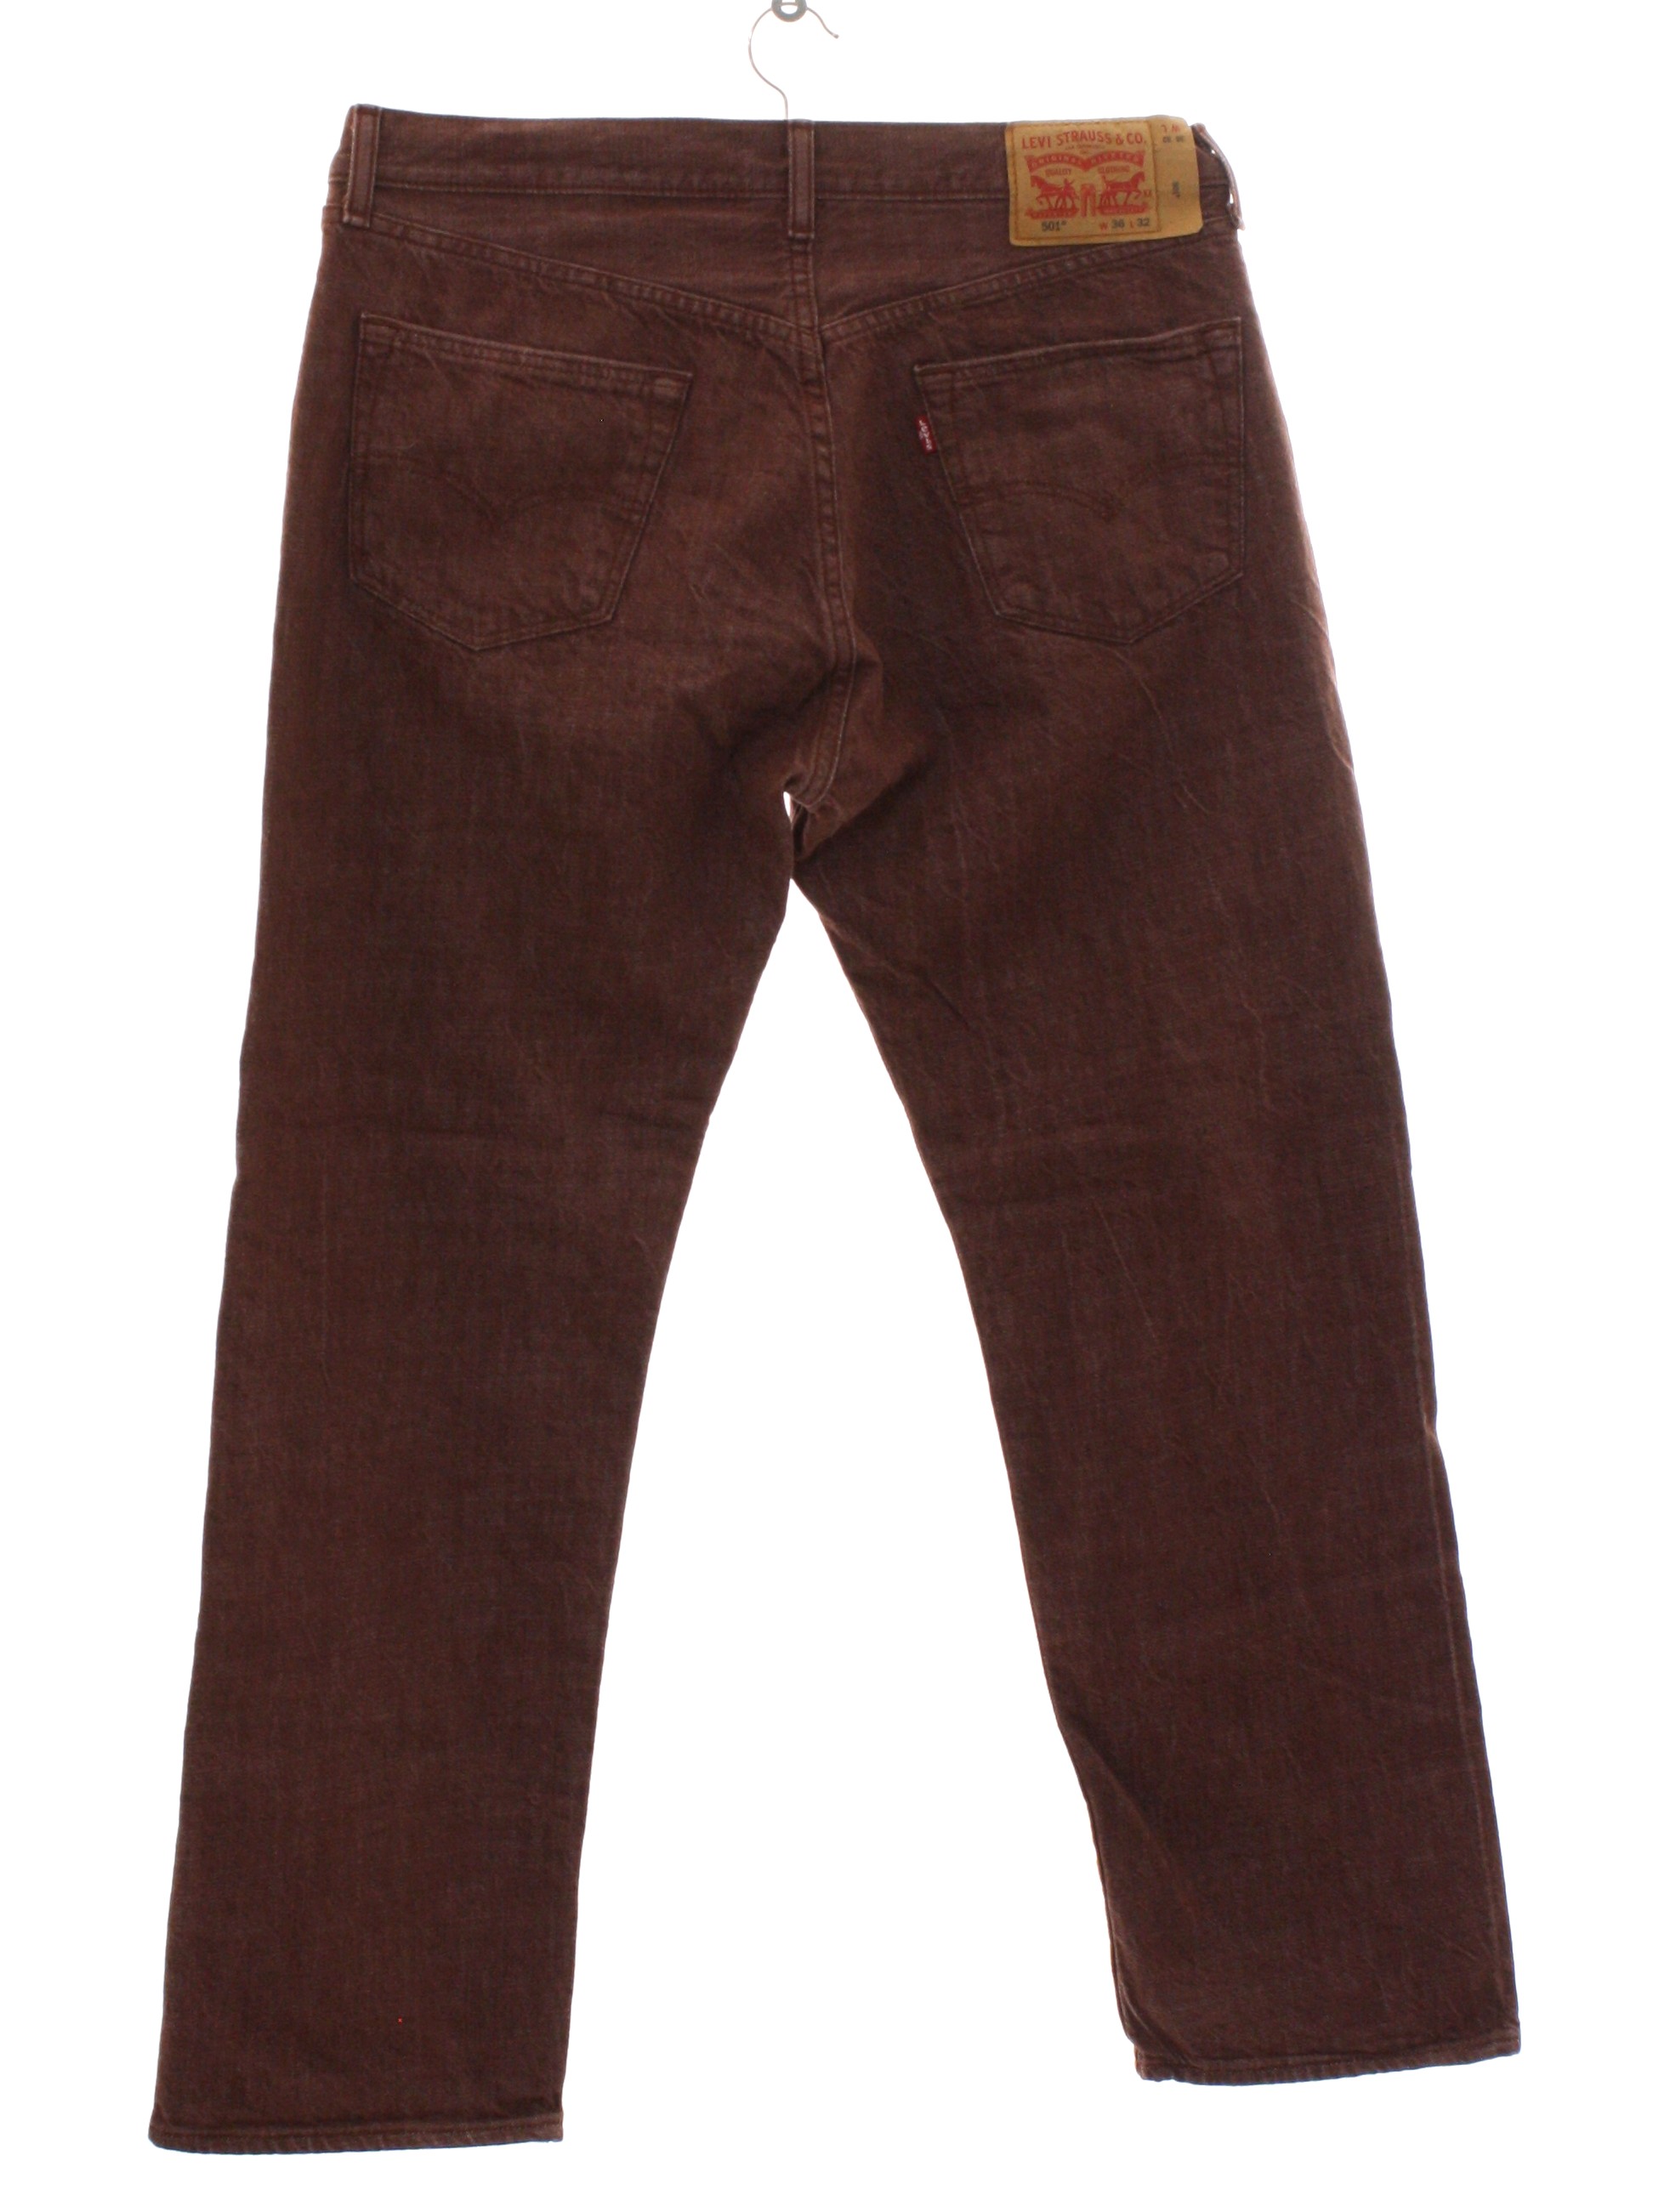 Pants: 90s -Levis 501 White Cone Denim- Mens as-new rosewood brown